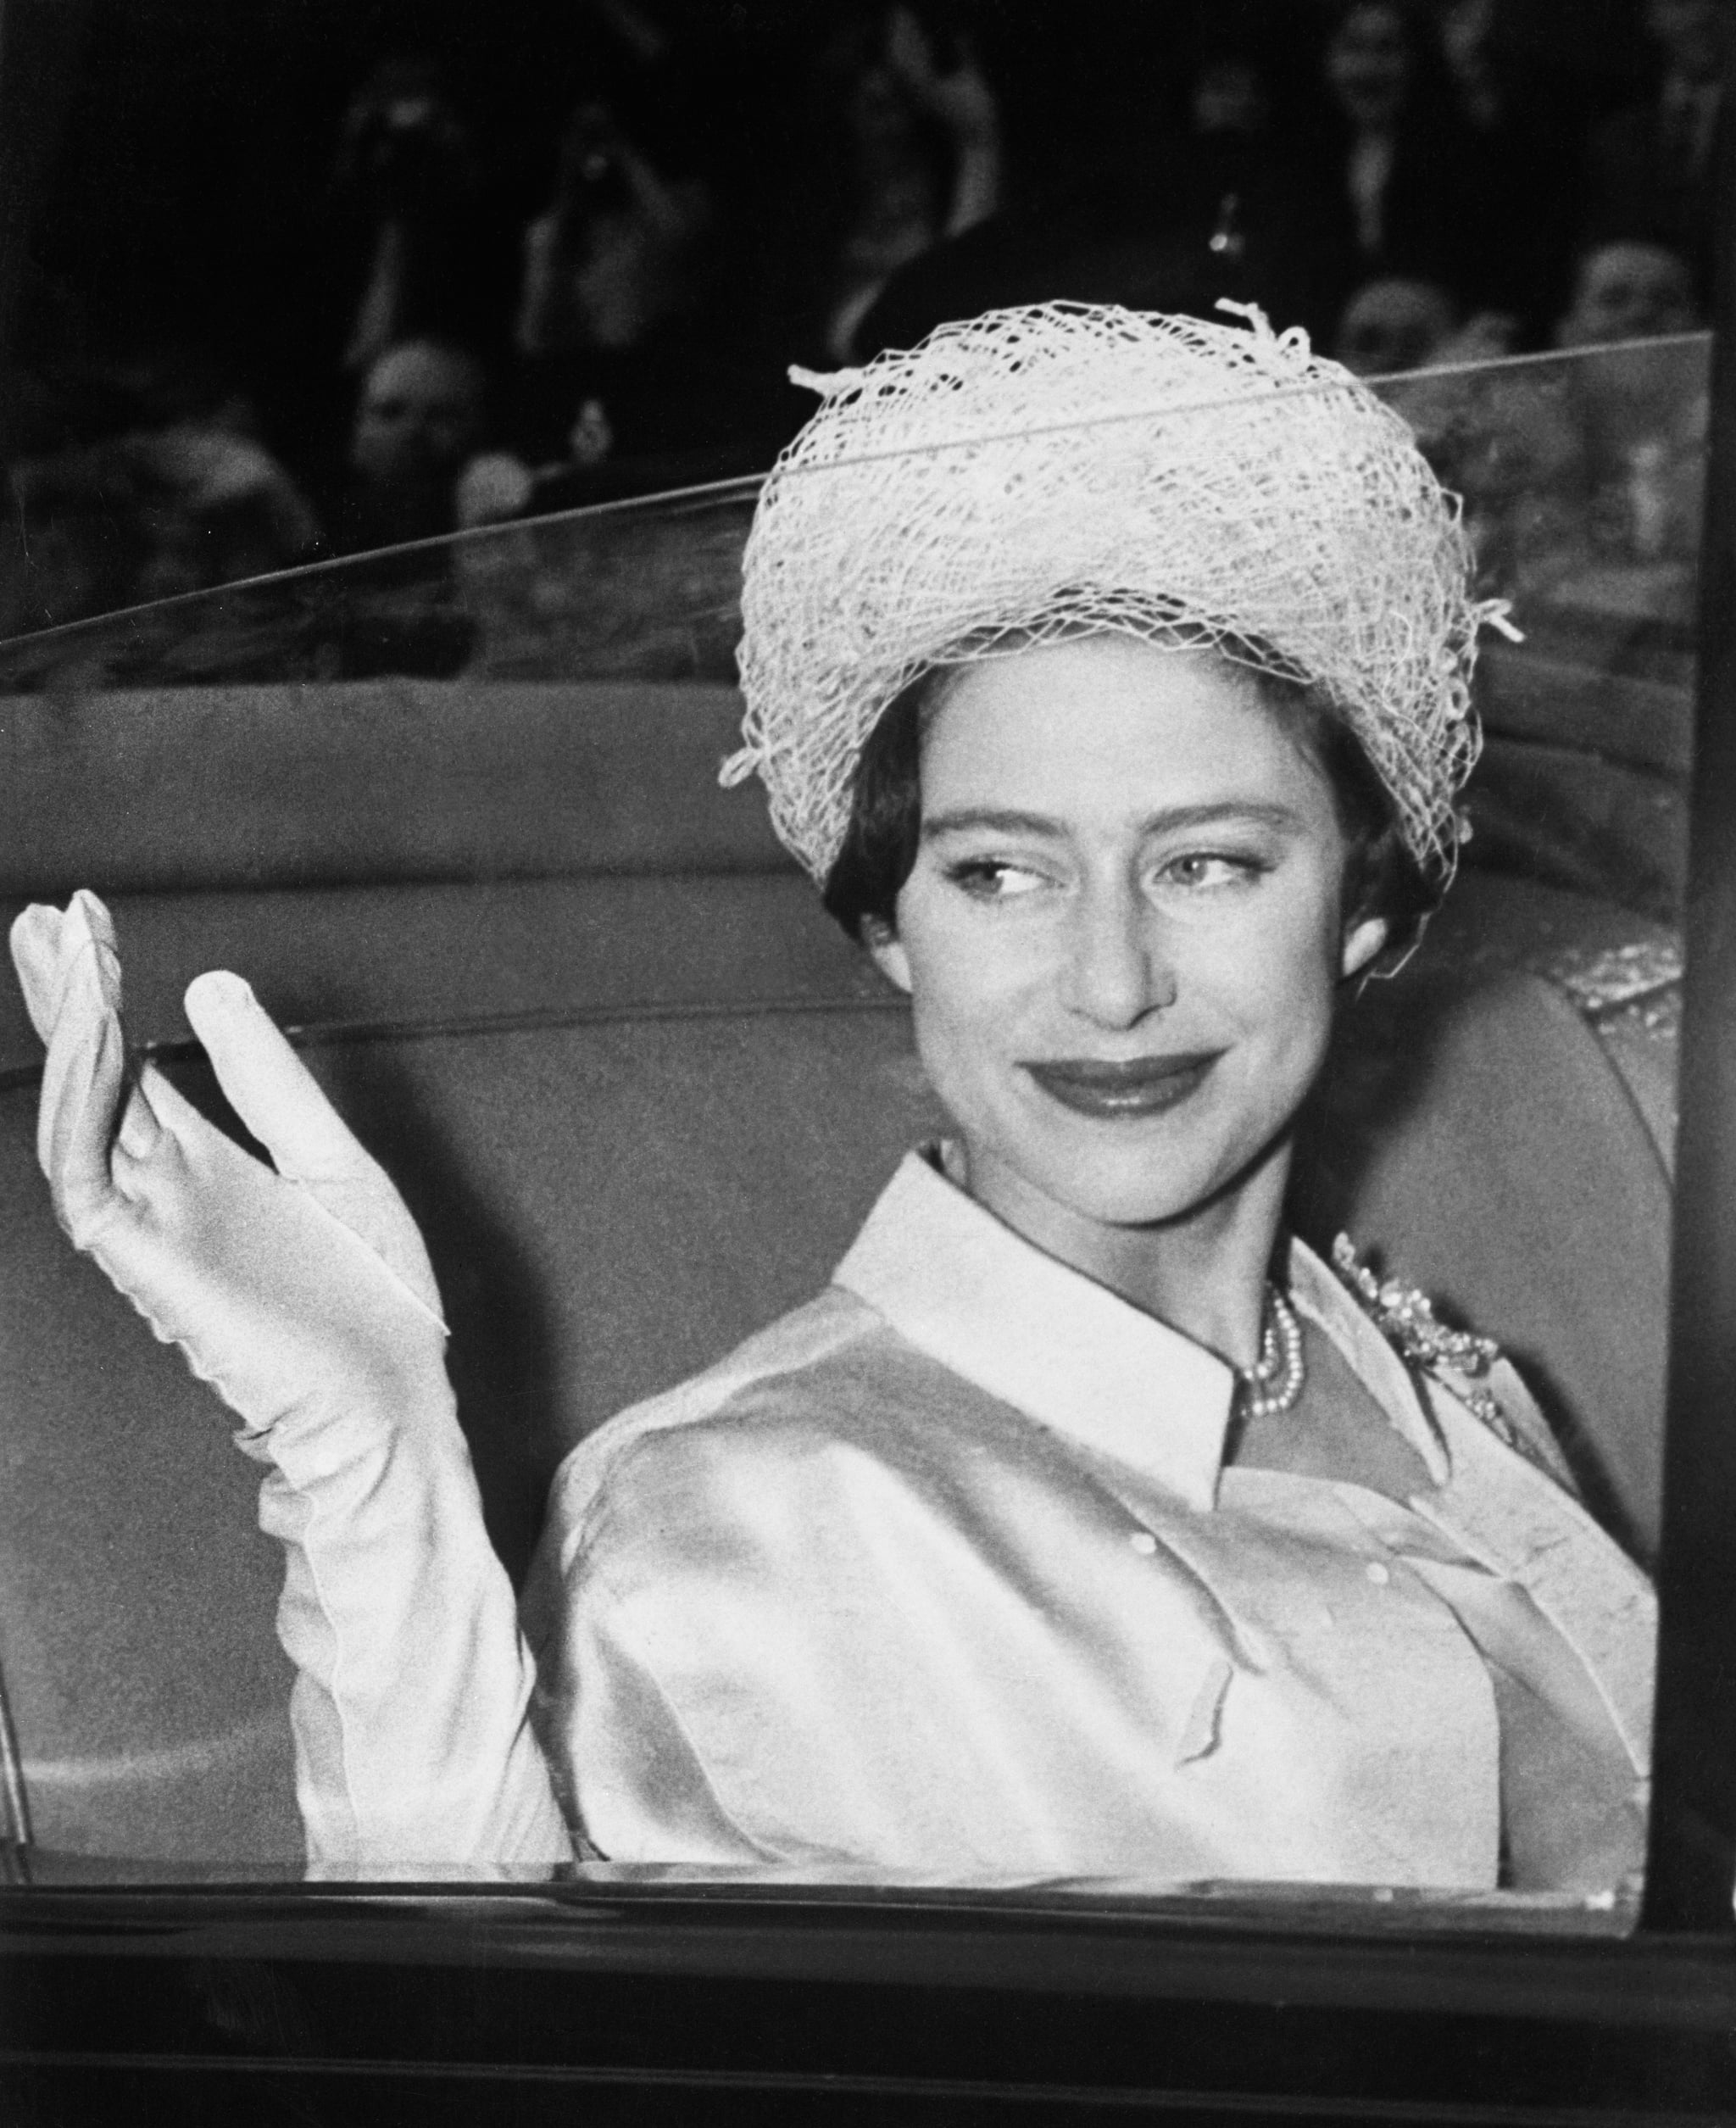 (Original Caption) Princess Margaret waves from her coach at Buckingham Palace here May 6th as she leaves on her honeymoon with Antony Armstrong-Jones.